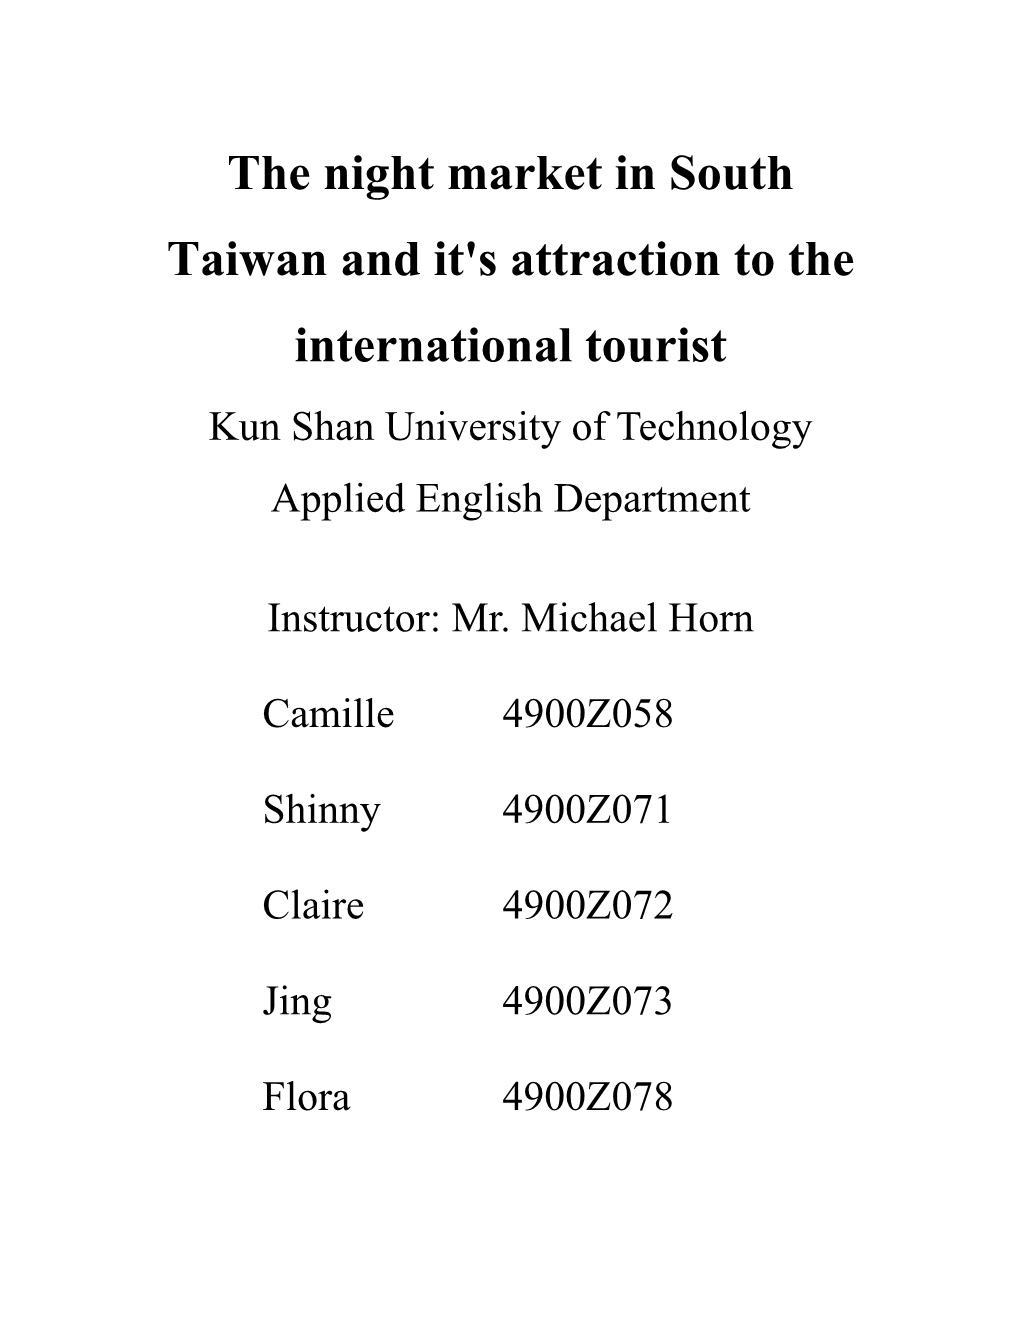 The Night Market in South Taiwan and It's Attraction to the International Tourist Kun Shan University of Technology Applied English Department